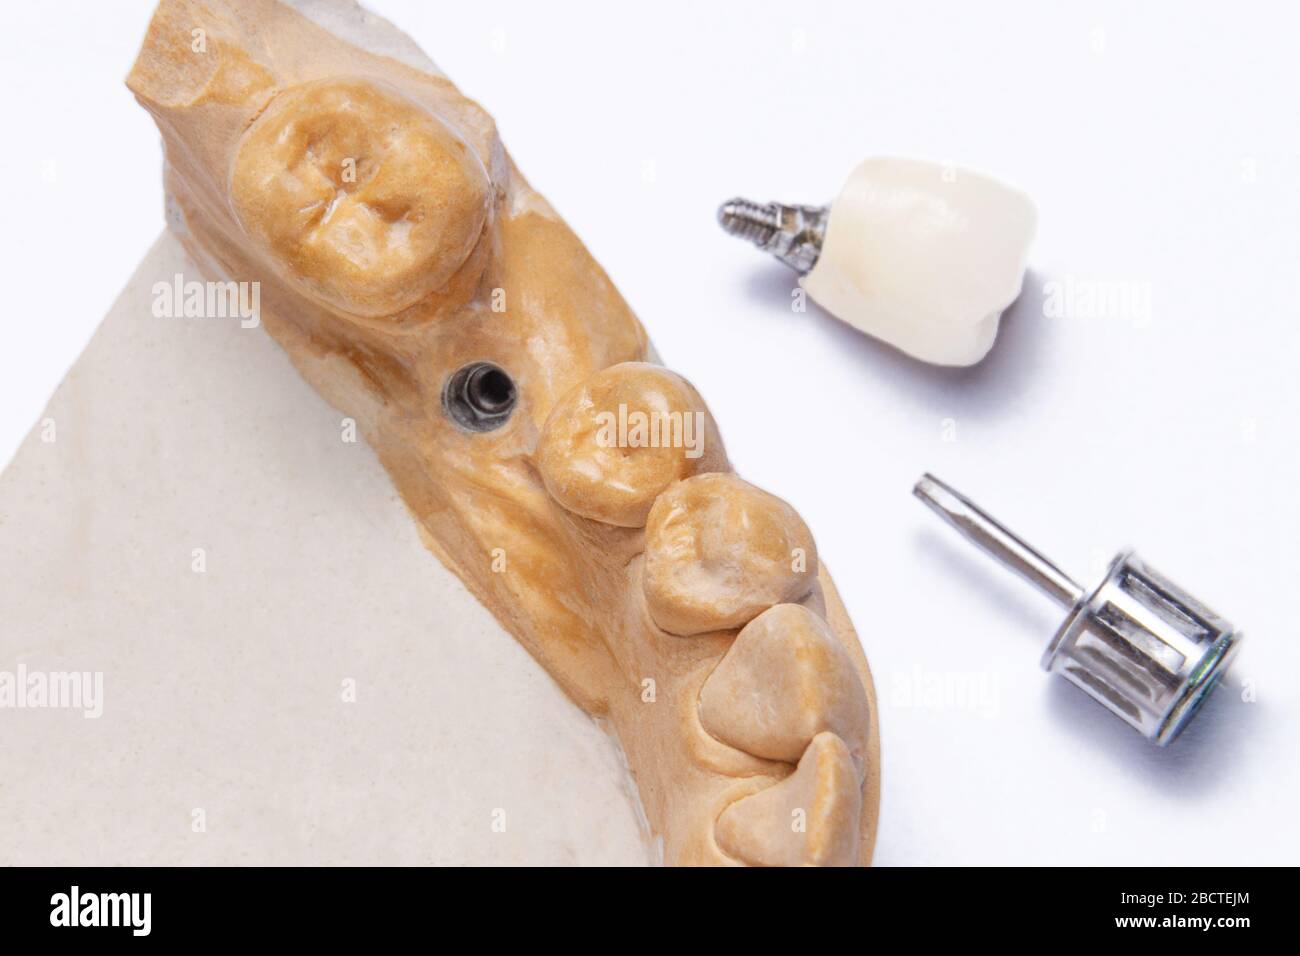 dental implant in the lower jaw close-up. gypsum model of the lower jaw with a crown on the implant and a screwdriver are isolated on a white backgrou Stock Photo